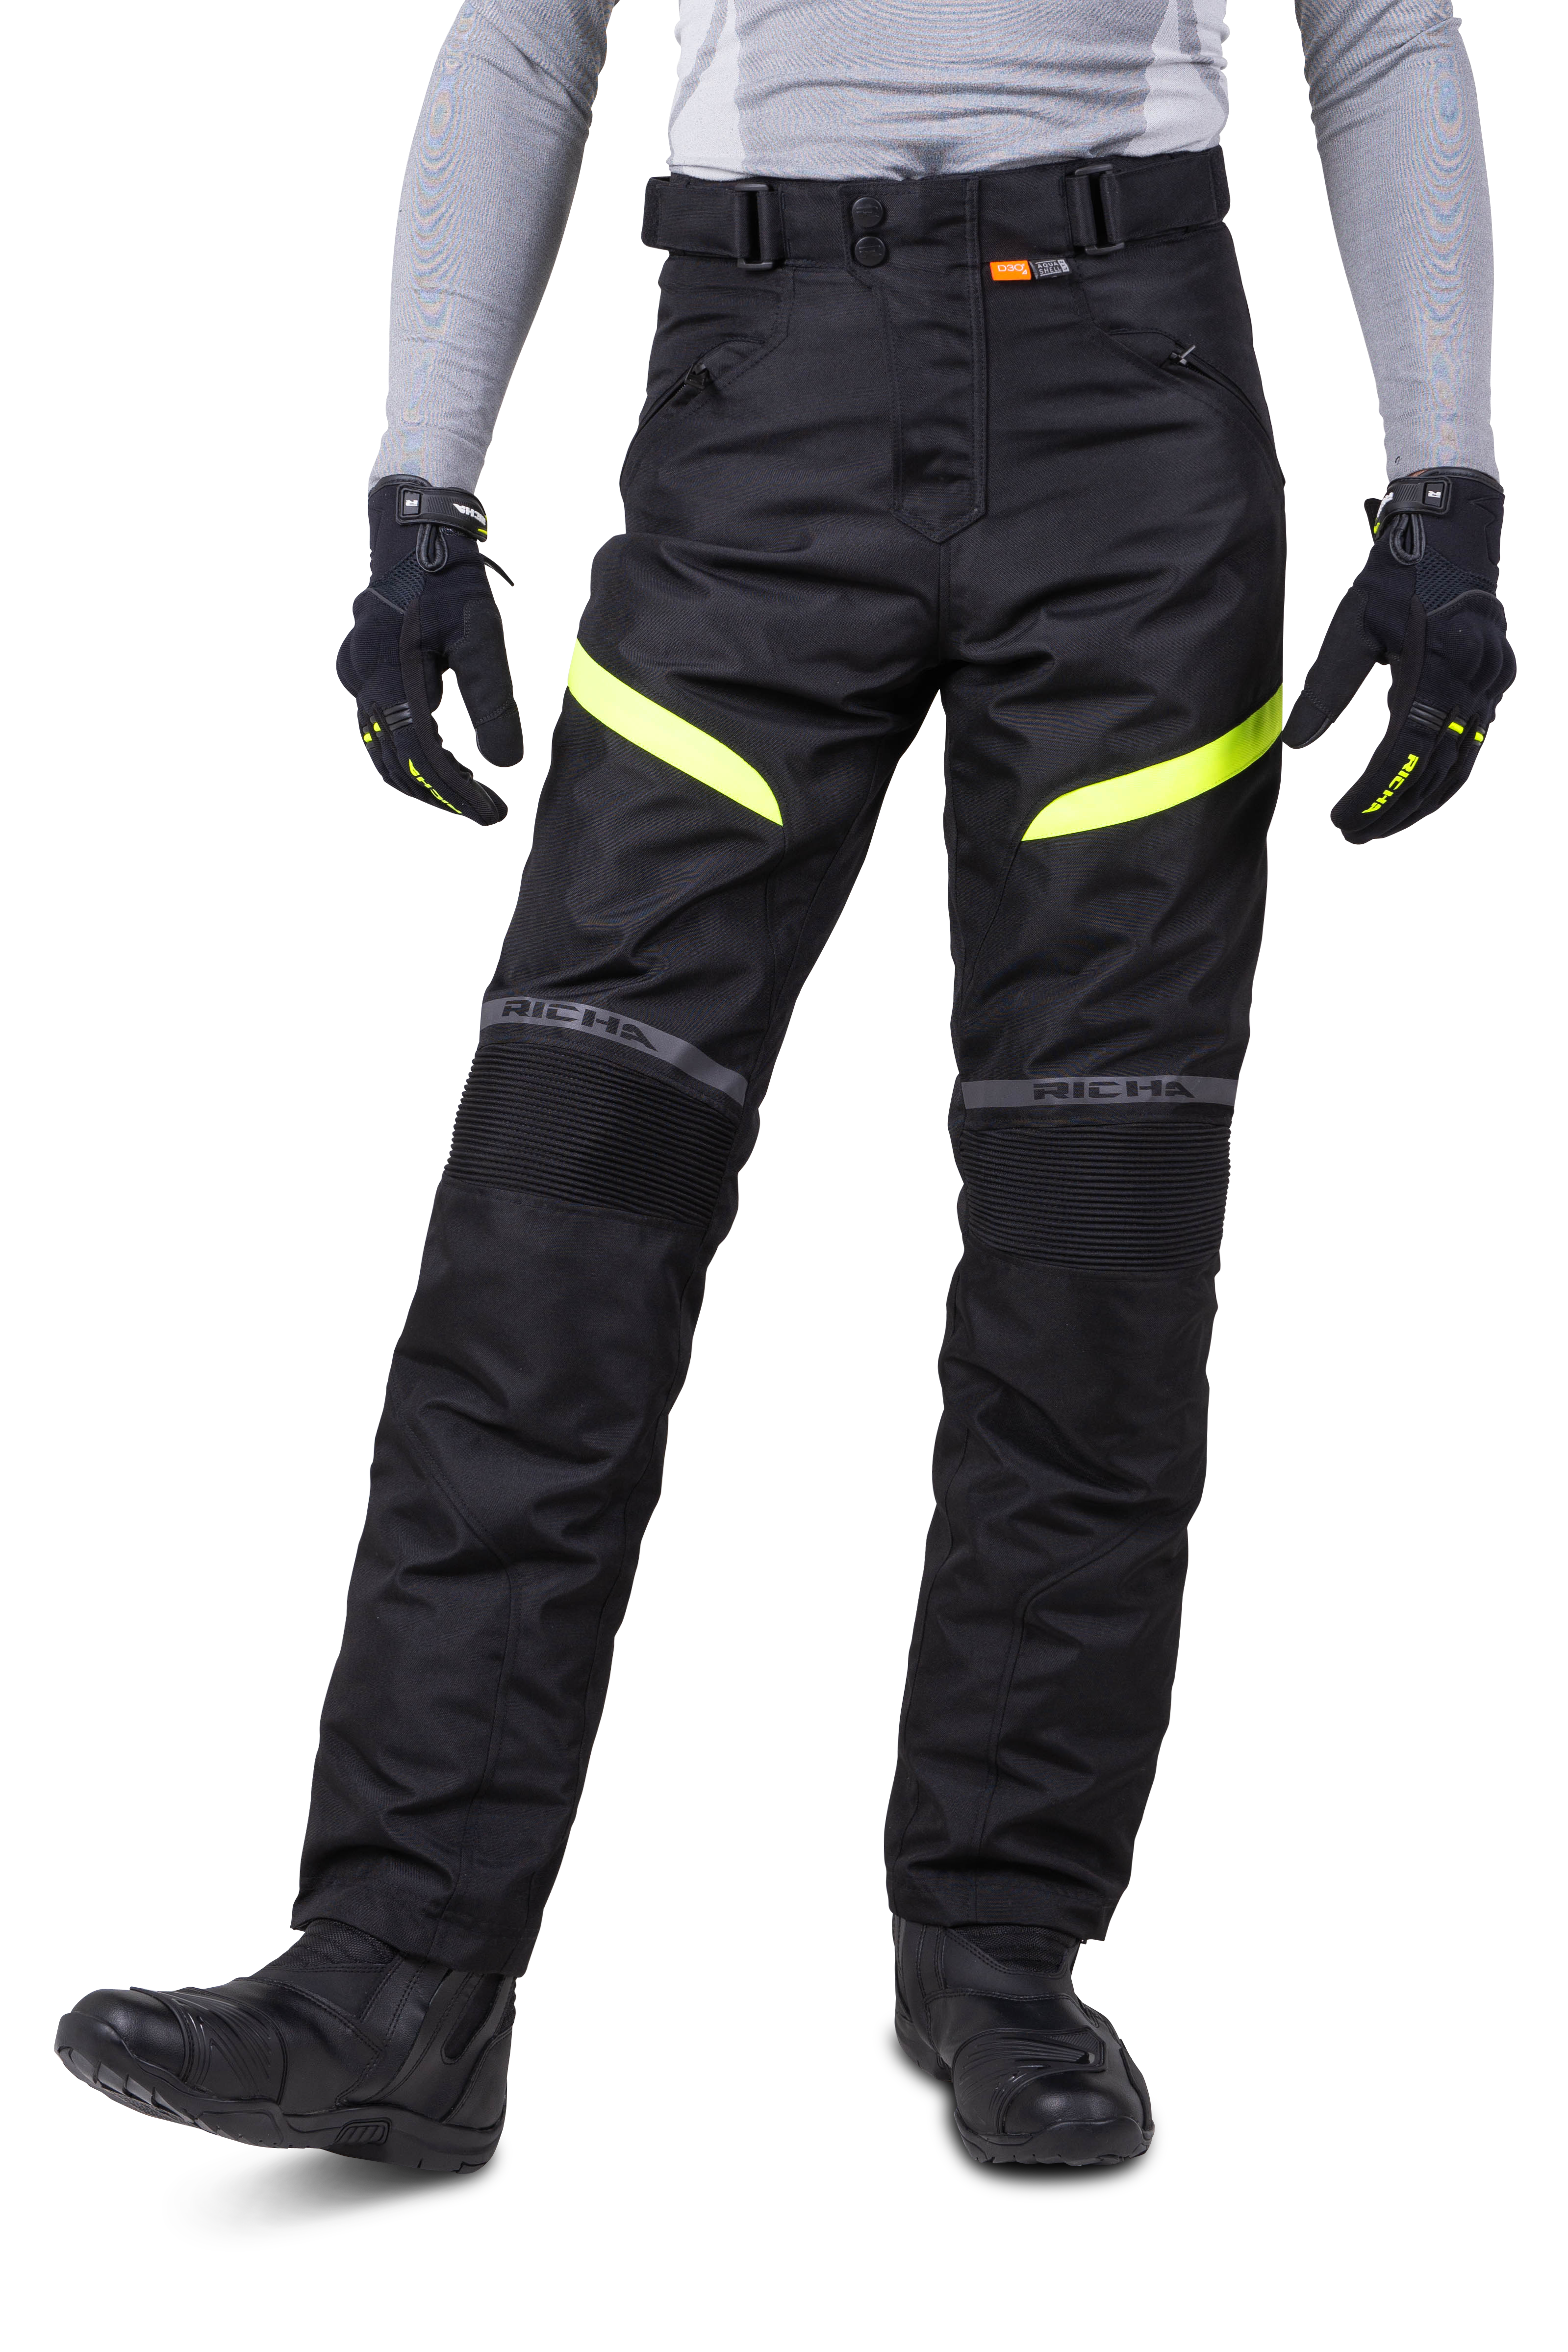 Duhan Pu Leather Motorcycle Racing Pants Jeans Trousers Riding Pants Pads  Armor Drawers Wind Water Proof Pd05 - Pants - AliExpress